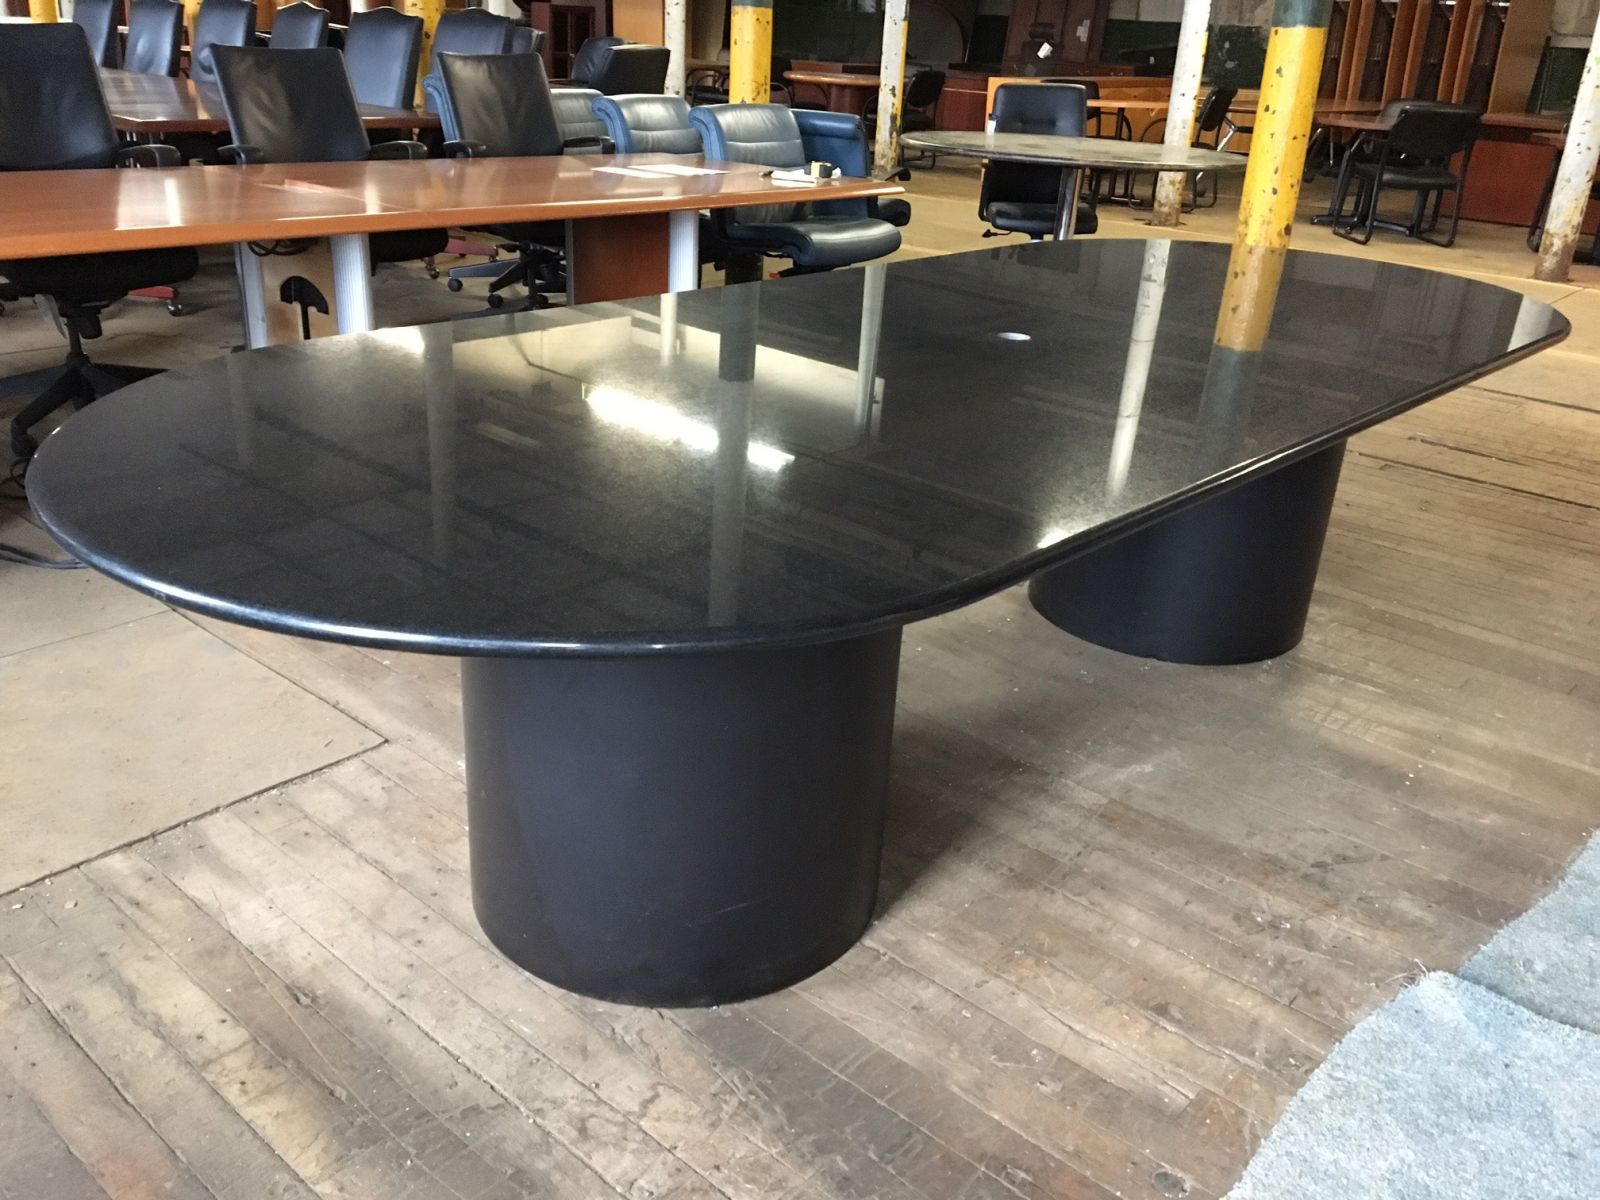 T9596C - 10 ft Black Granite Oval Conference Table